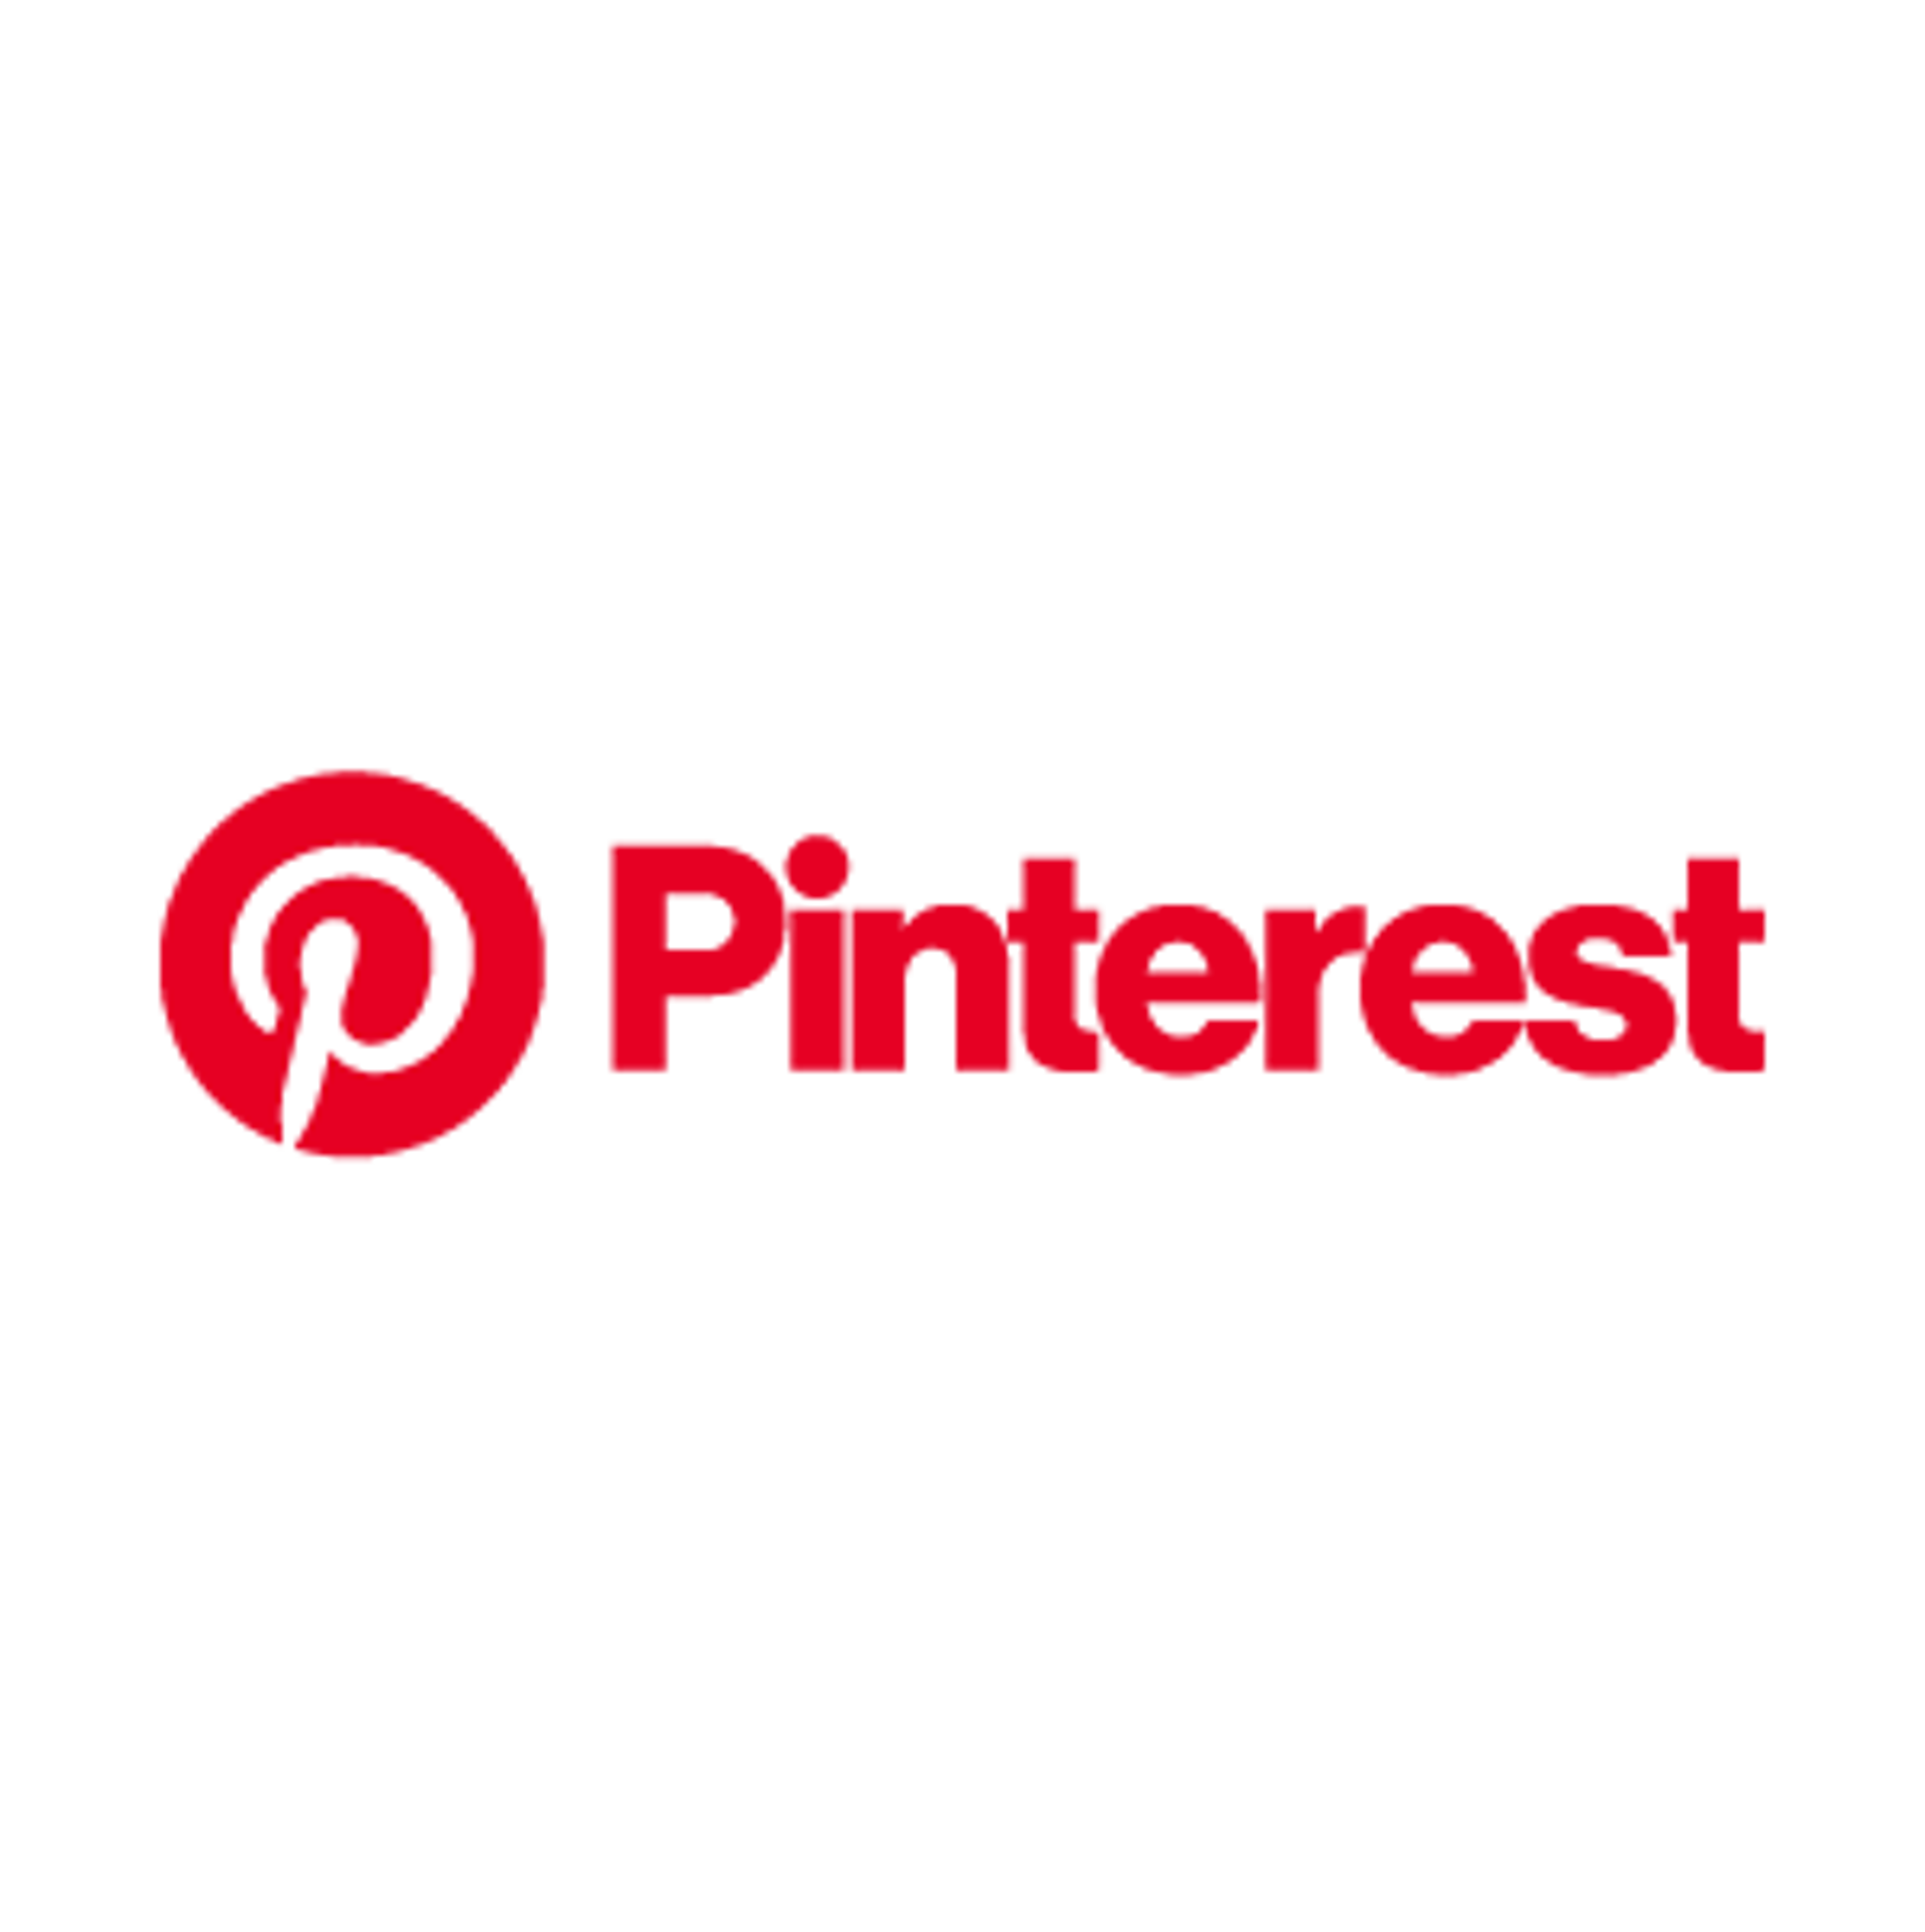 Pinterest Analysts Highlight Margin Expansion Potential From Cost Management, Reasonable MAUs Post Mixed Q4